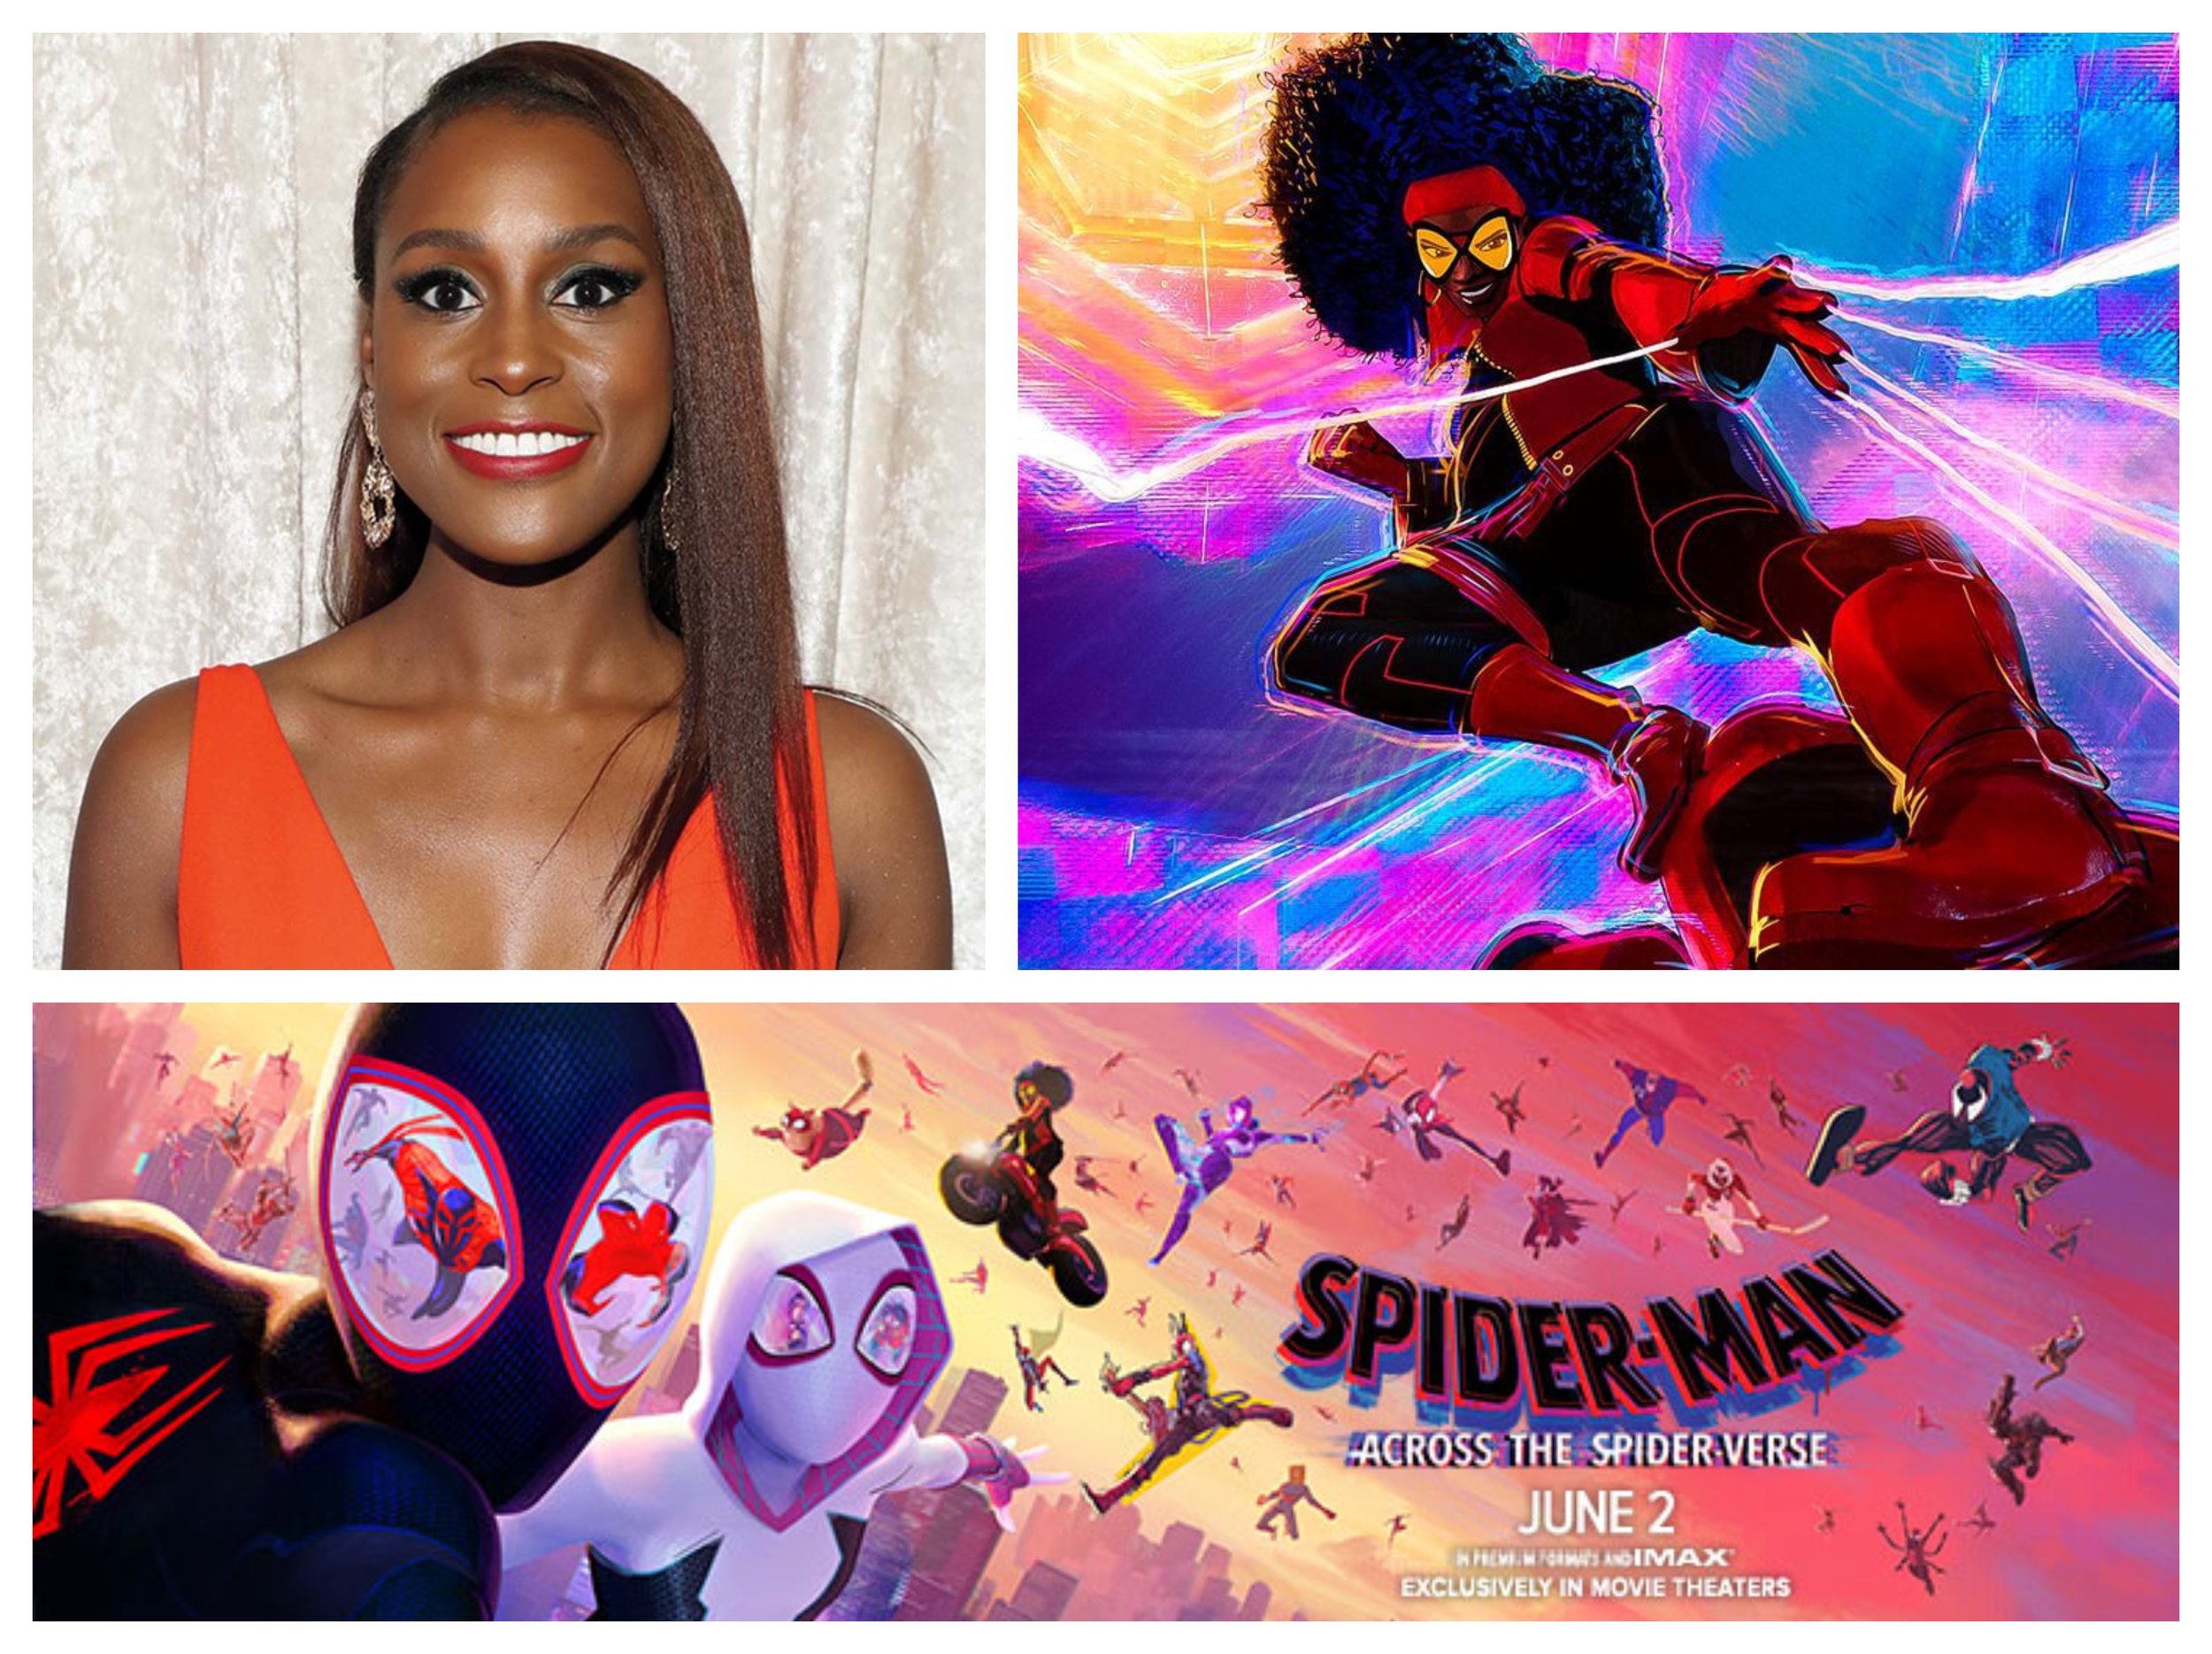 Exclusive: Issa Rae on playing Jessica Drew/ Spider-Woman in Spider-Man ...